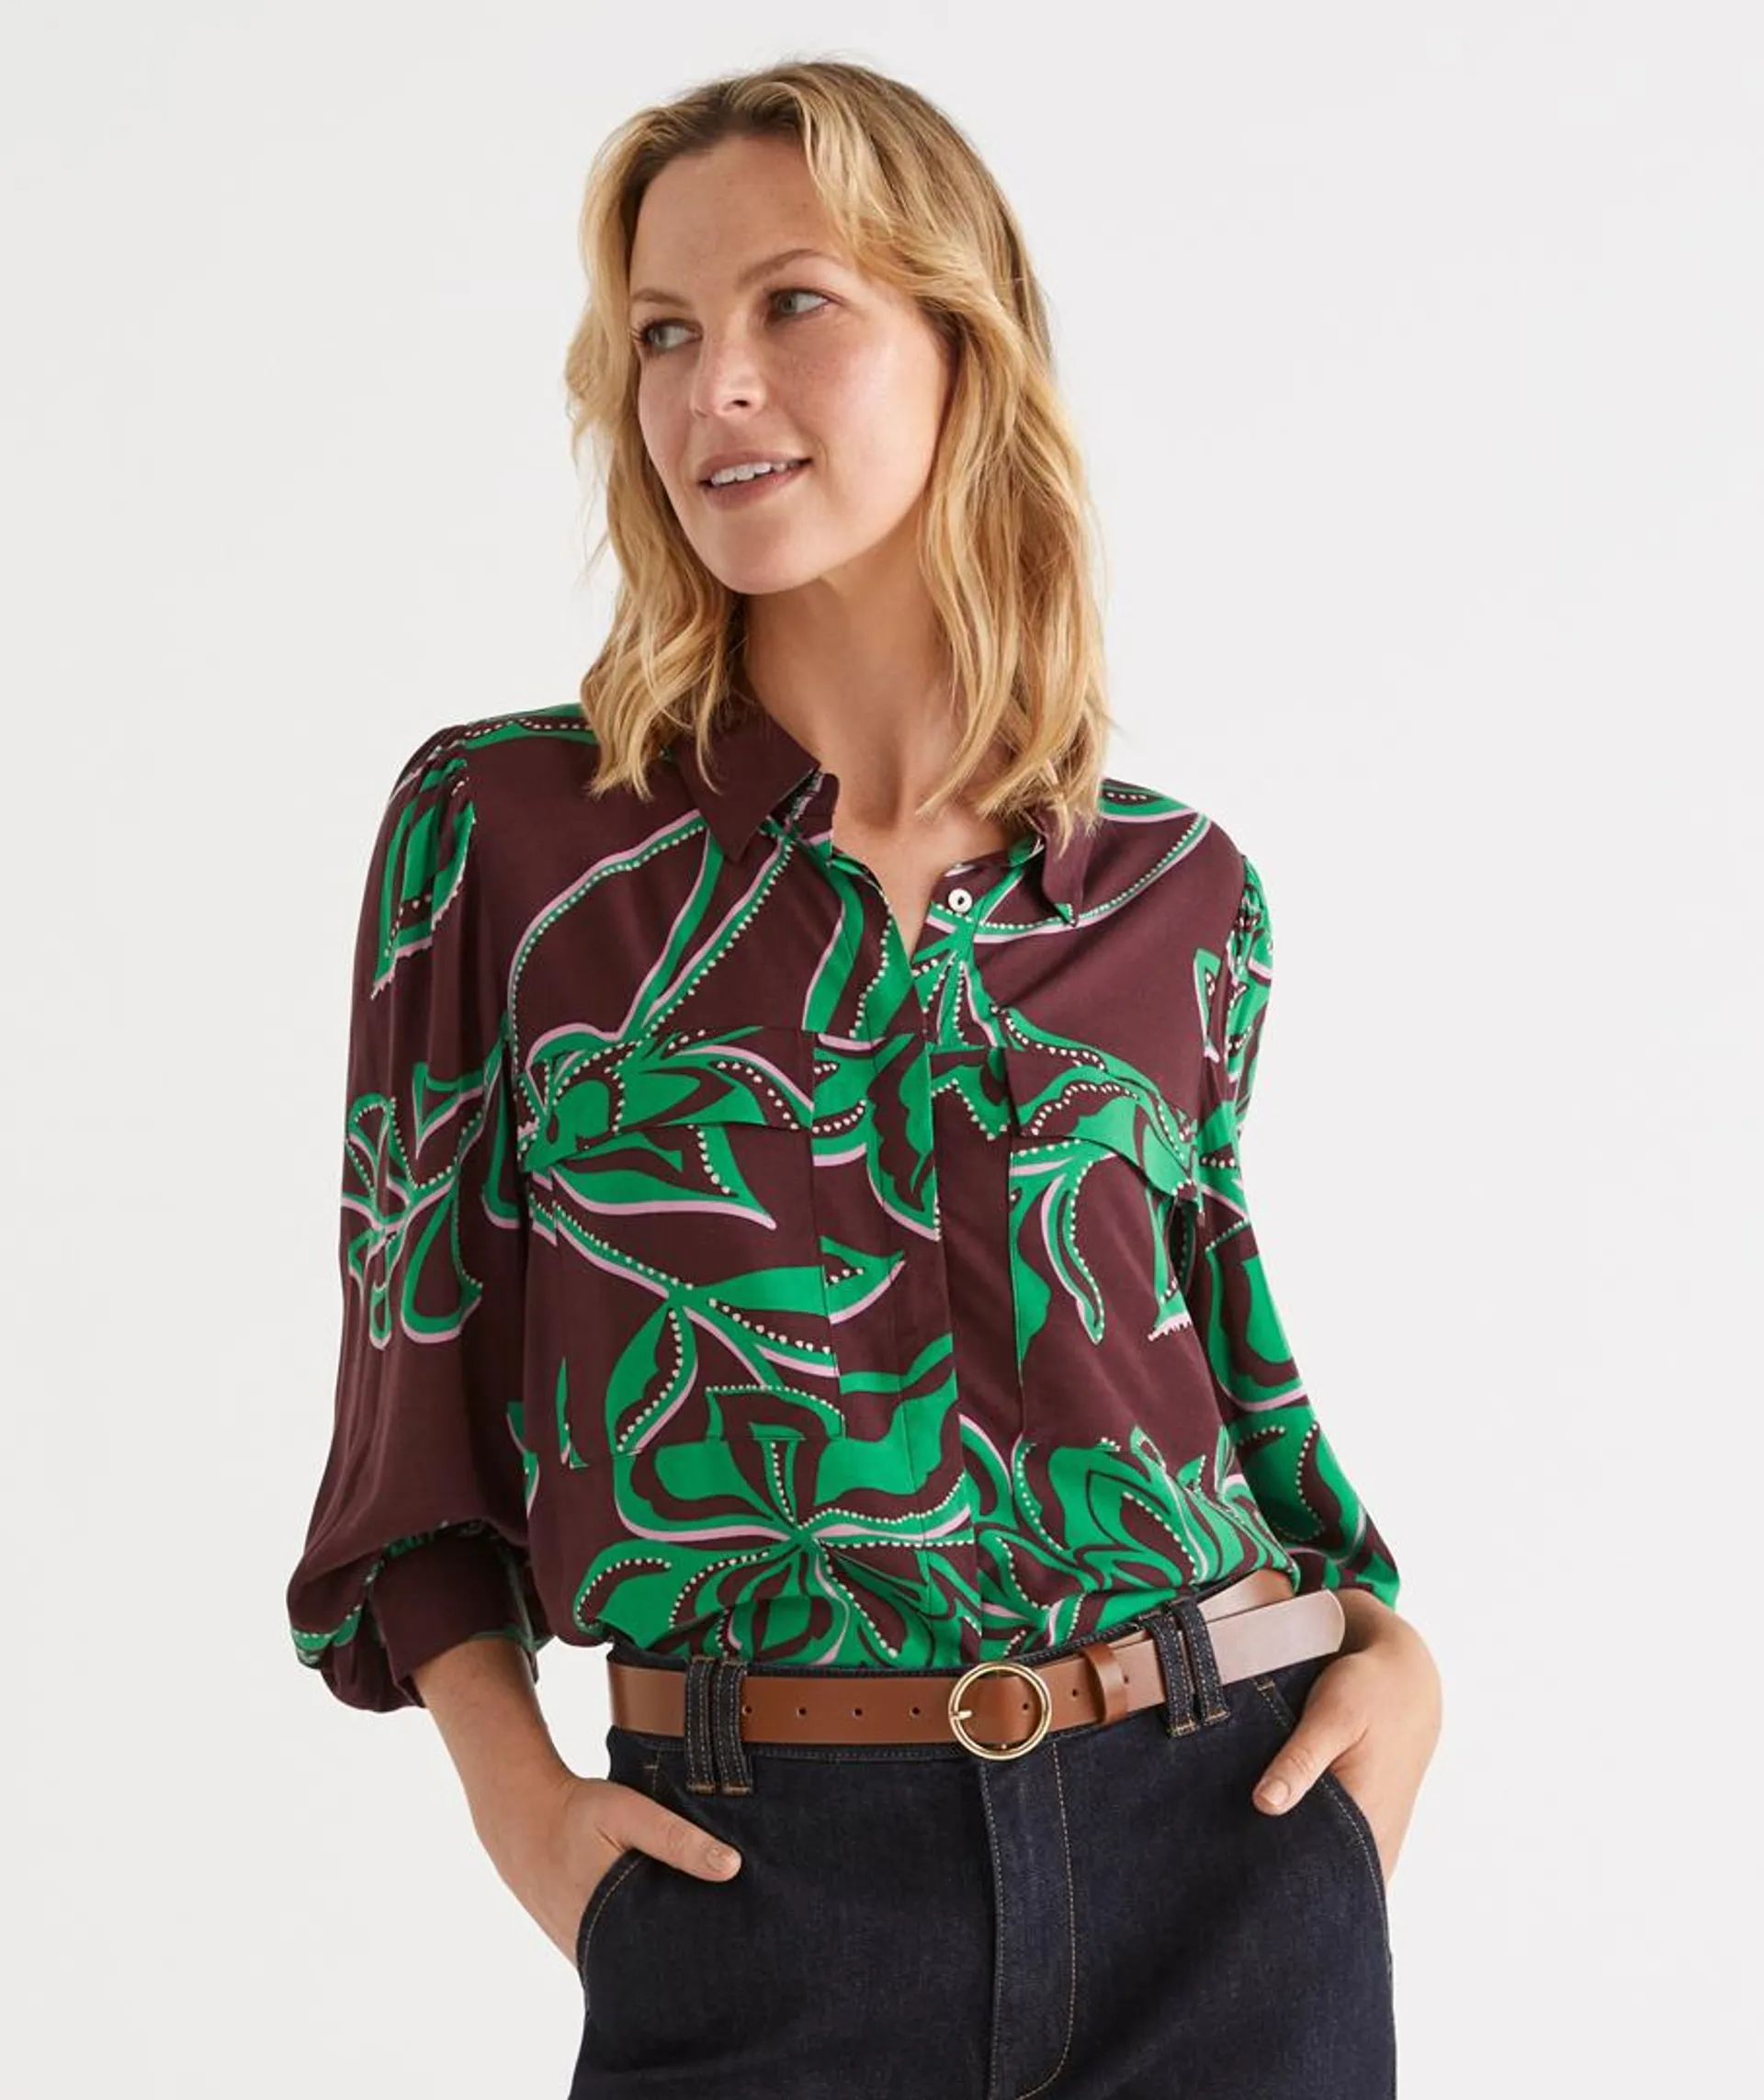 ABSTRACT BLOOM PRINT POPOVER SHIRT